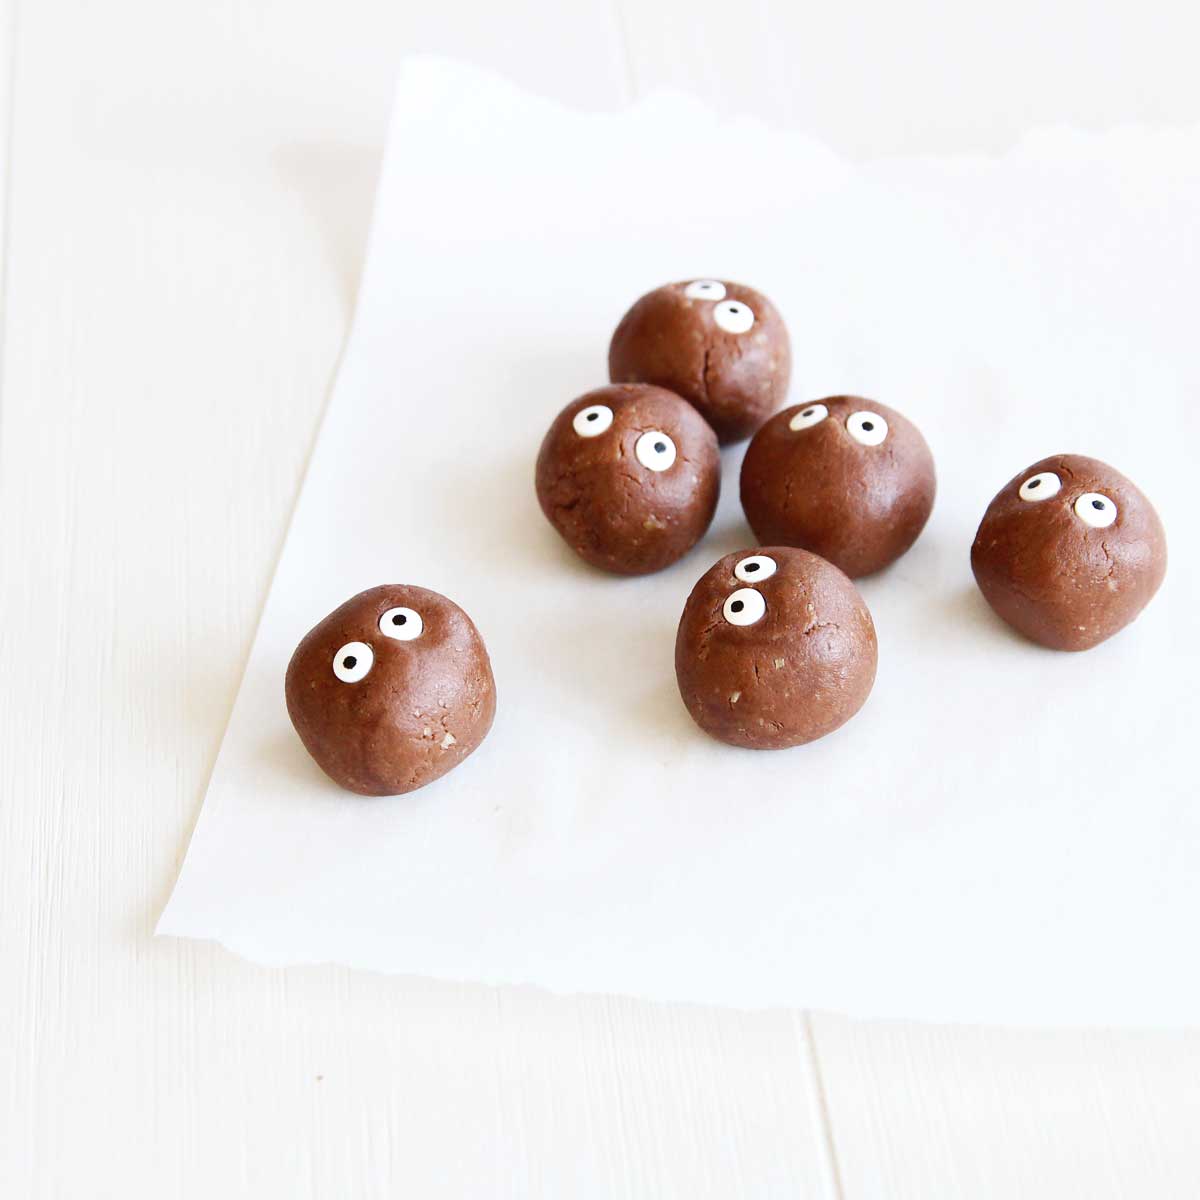 Soot Spirit Chocolate Protein Balls for Halloween (no-bake, Vegan recipe) - Chocolate Protein Balls